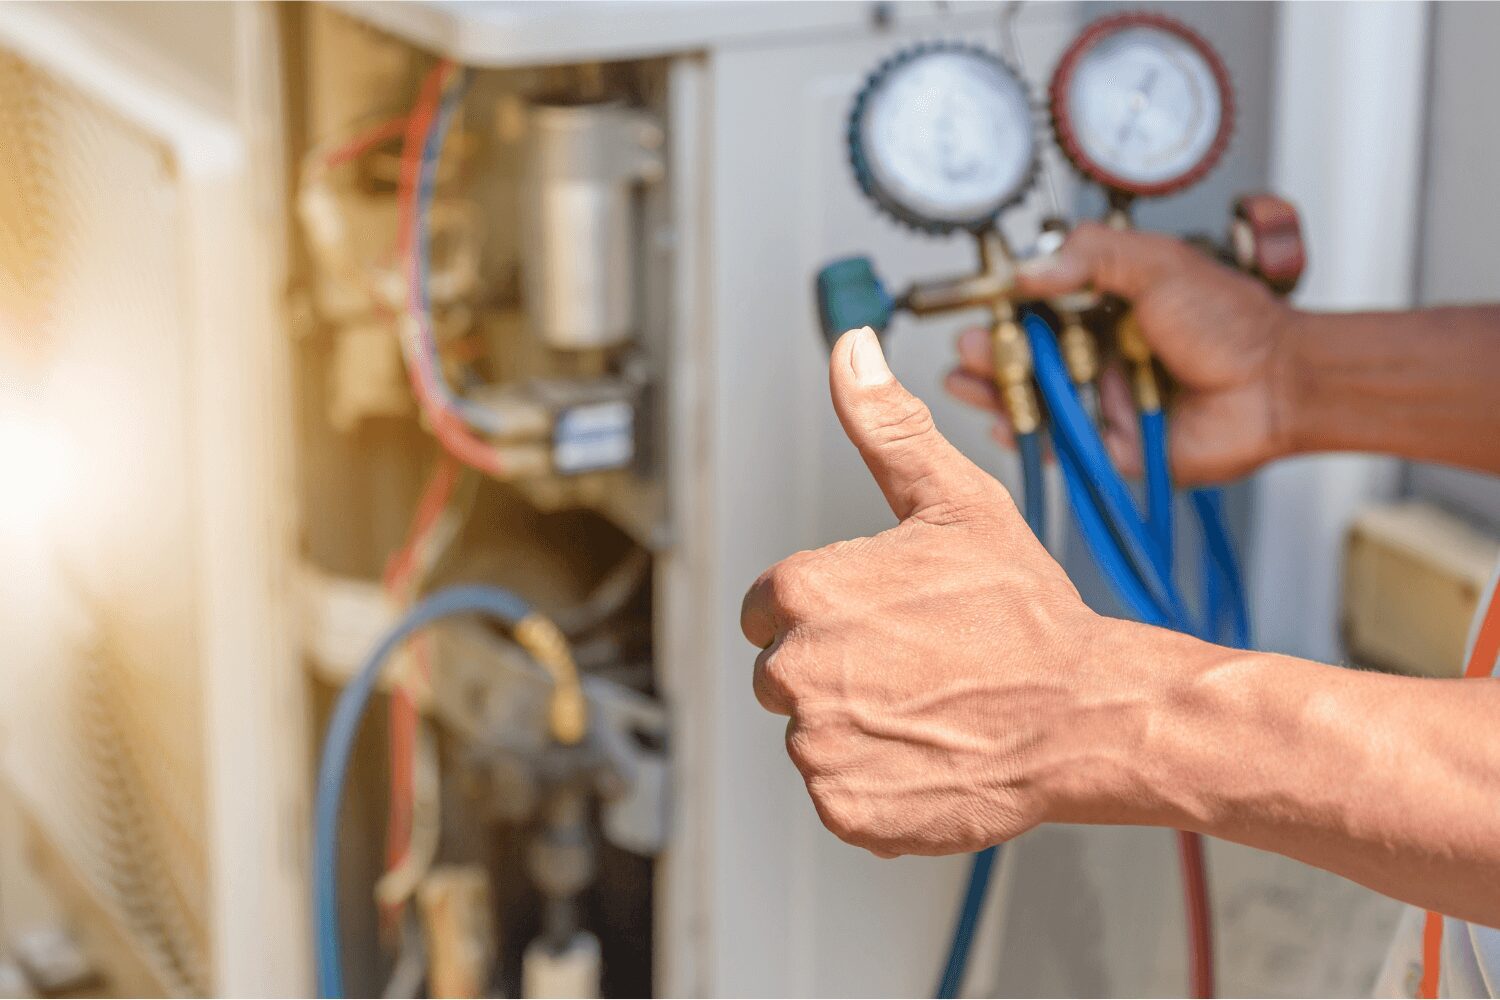 A person giving thumbs up next to an air conditioner.